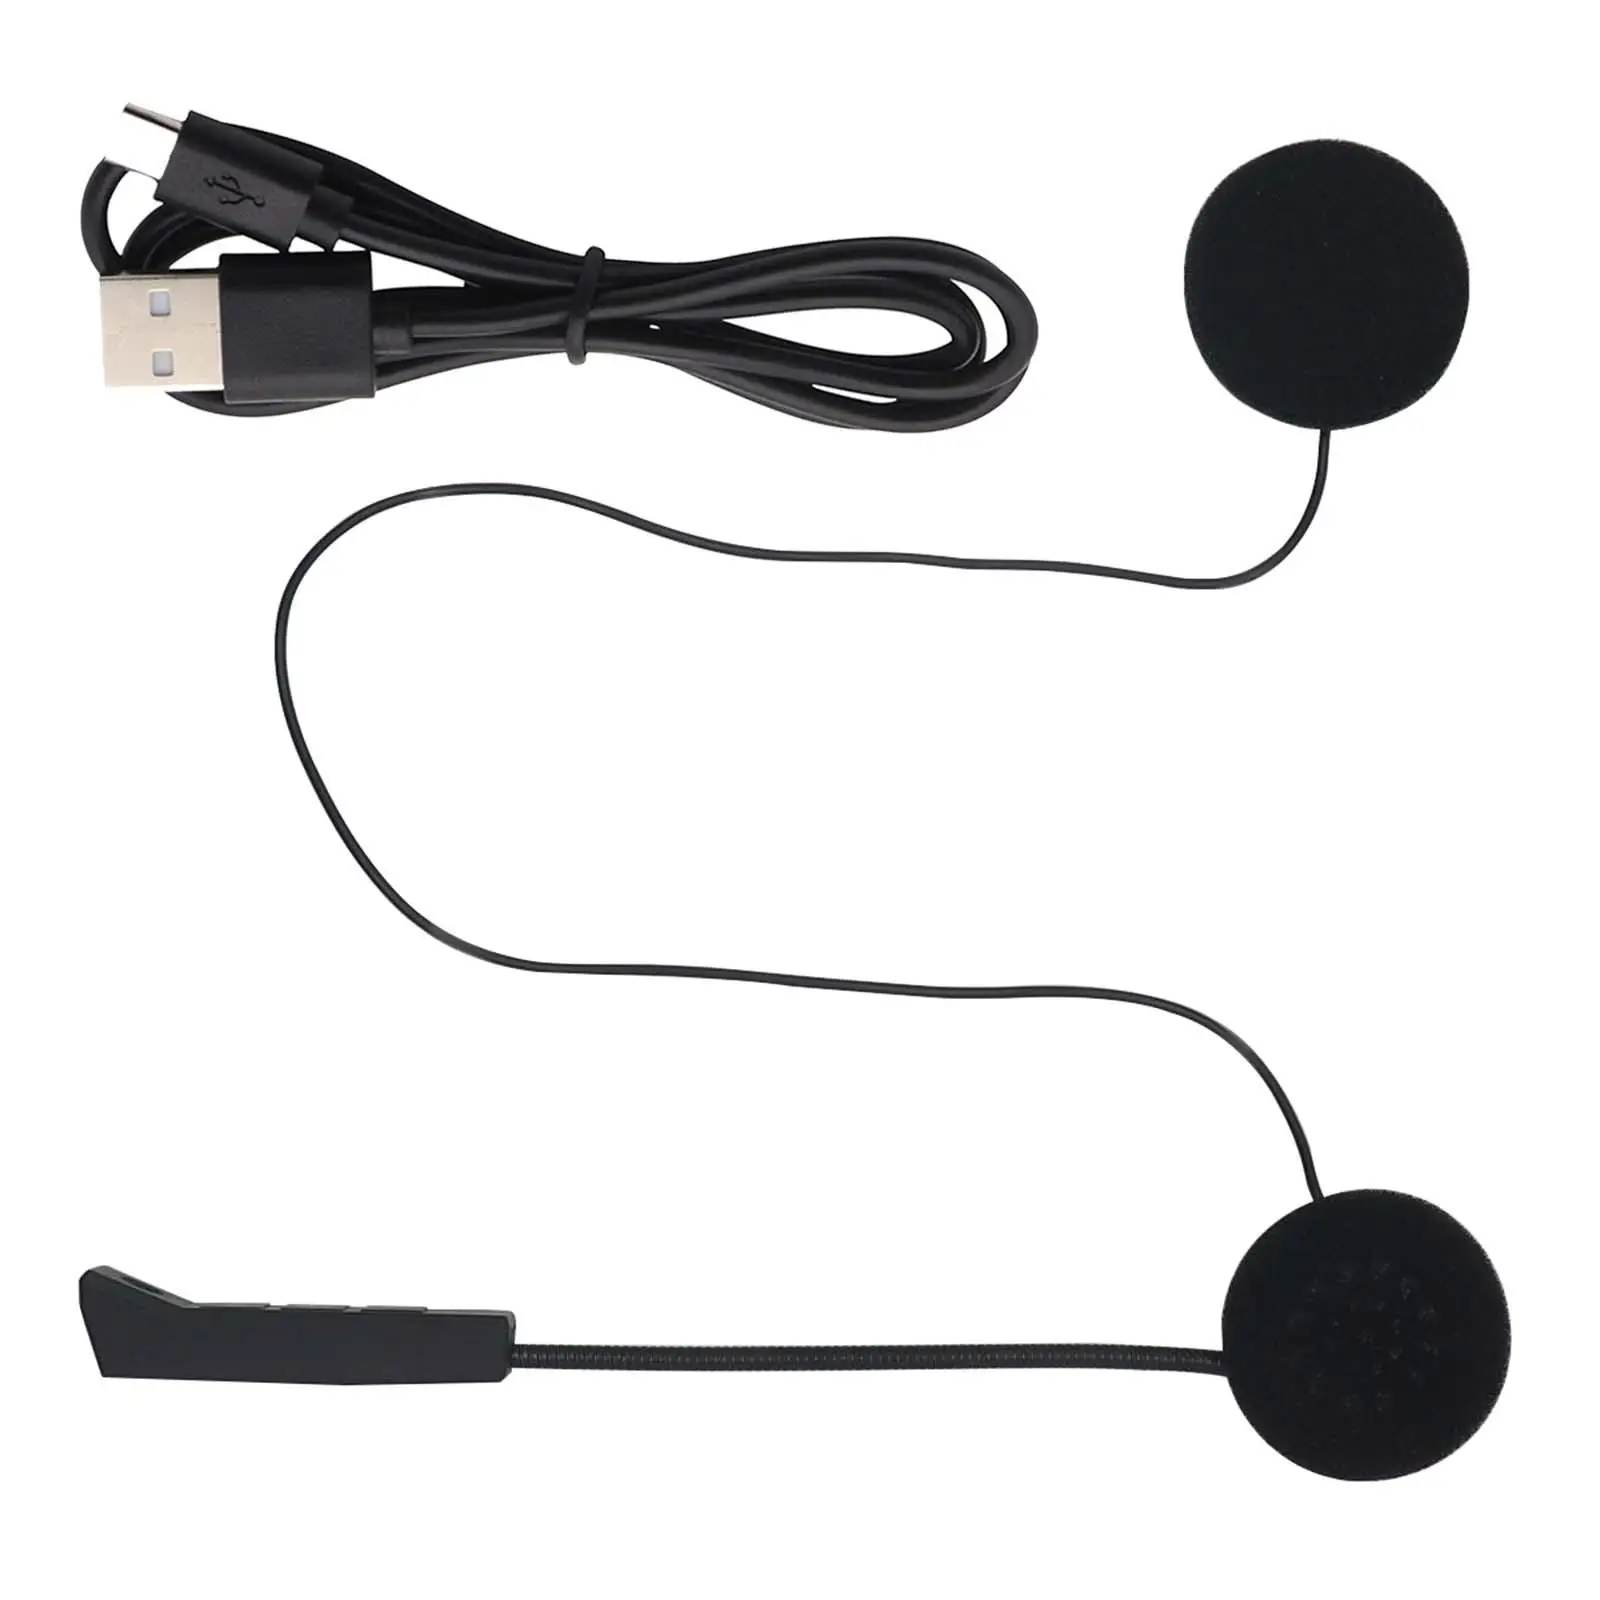 Wireless Motorcycle Helmet Headset Call Answering Music Player Clear Sound Motorbike for Motorcycle Riding Universal Earphones